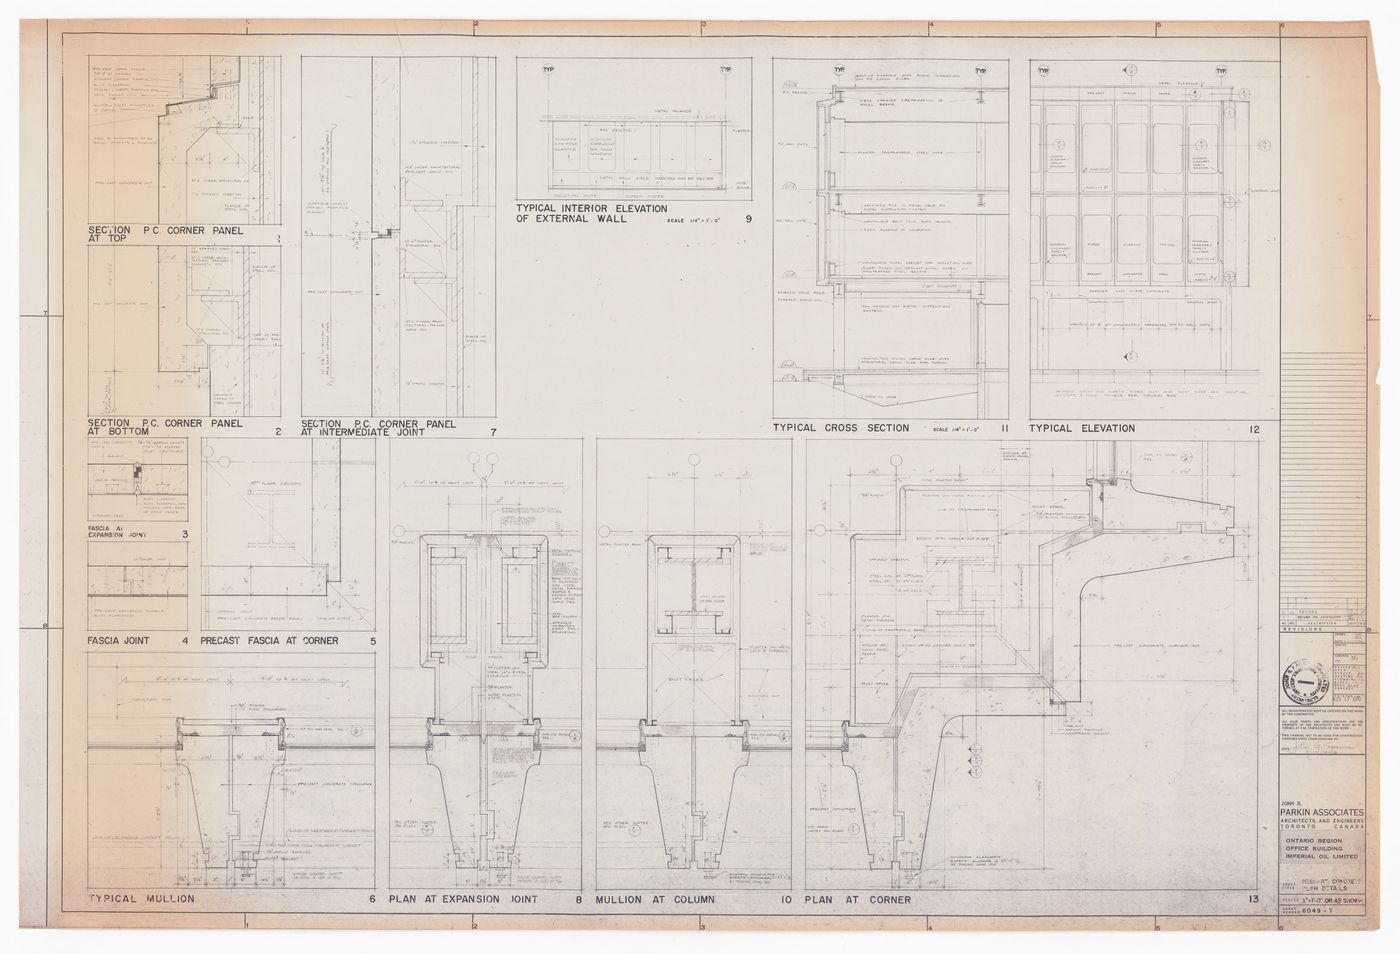 Construction precast concrete plan details for Imperial Oil Limited, Ontario Region Office Building, North York